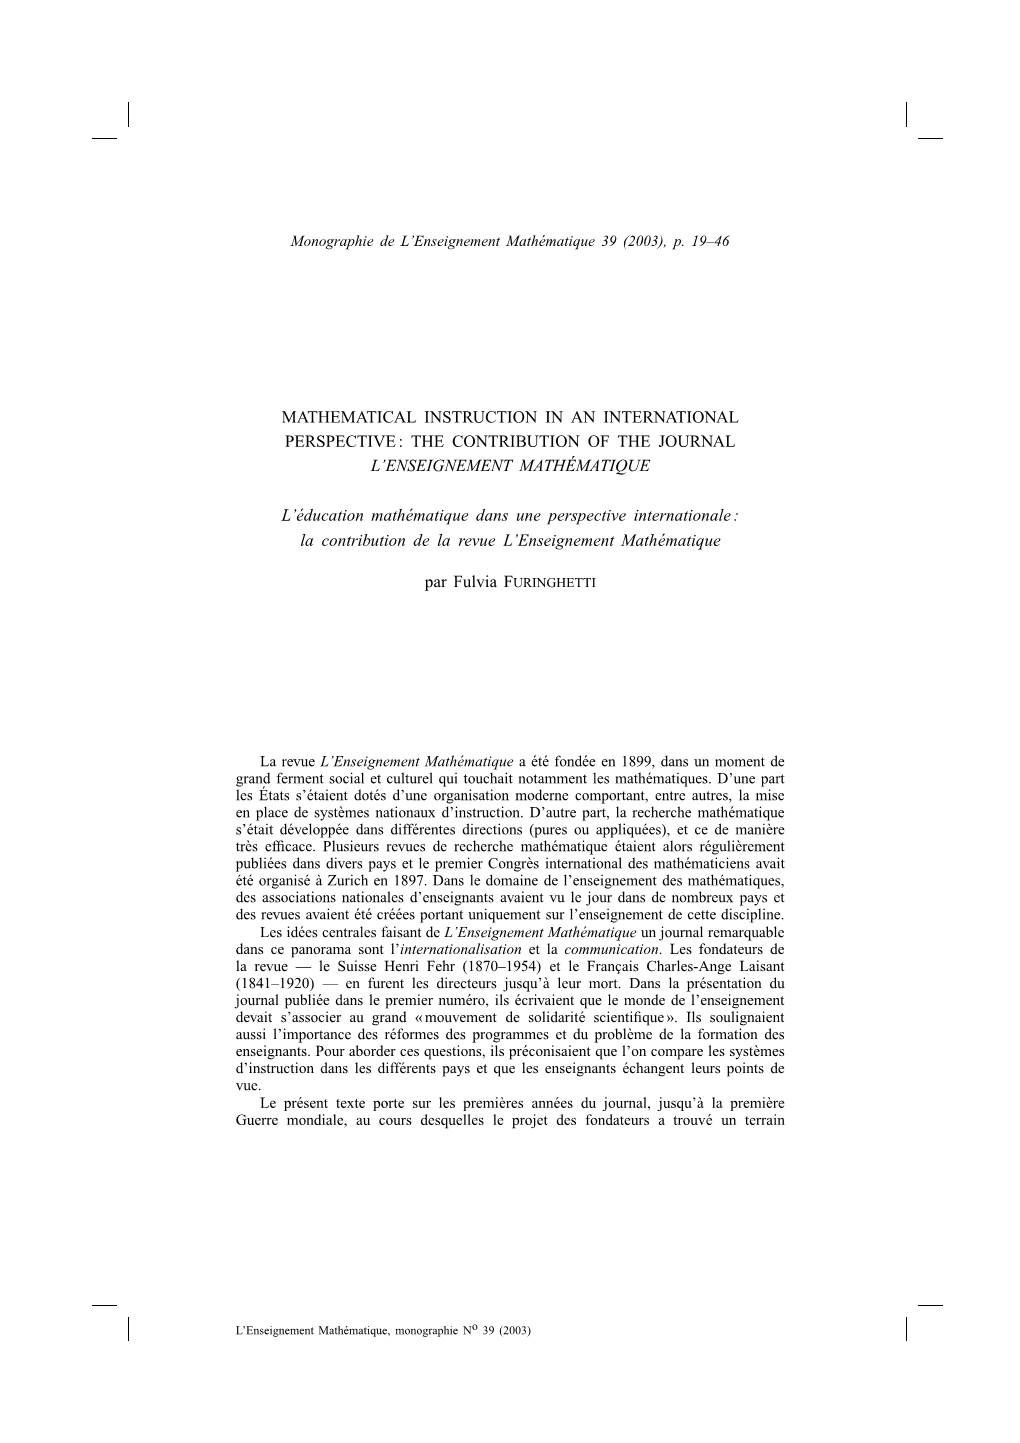 Mathematical Instruction in an International Perspective : the Contribution of the Journal L'enseignement Mathemaâ Tique